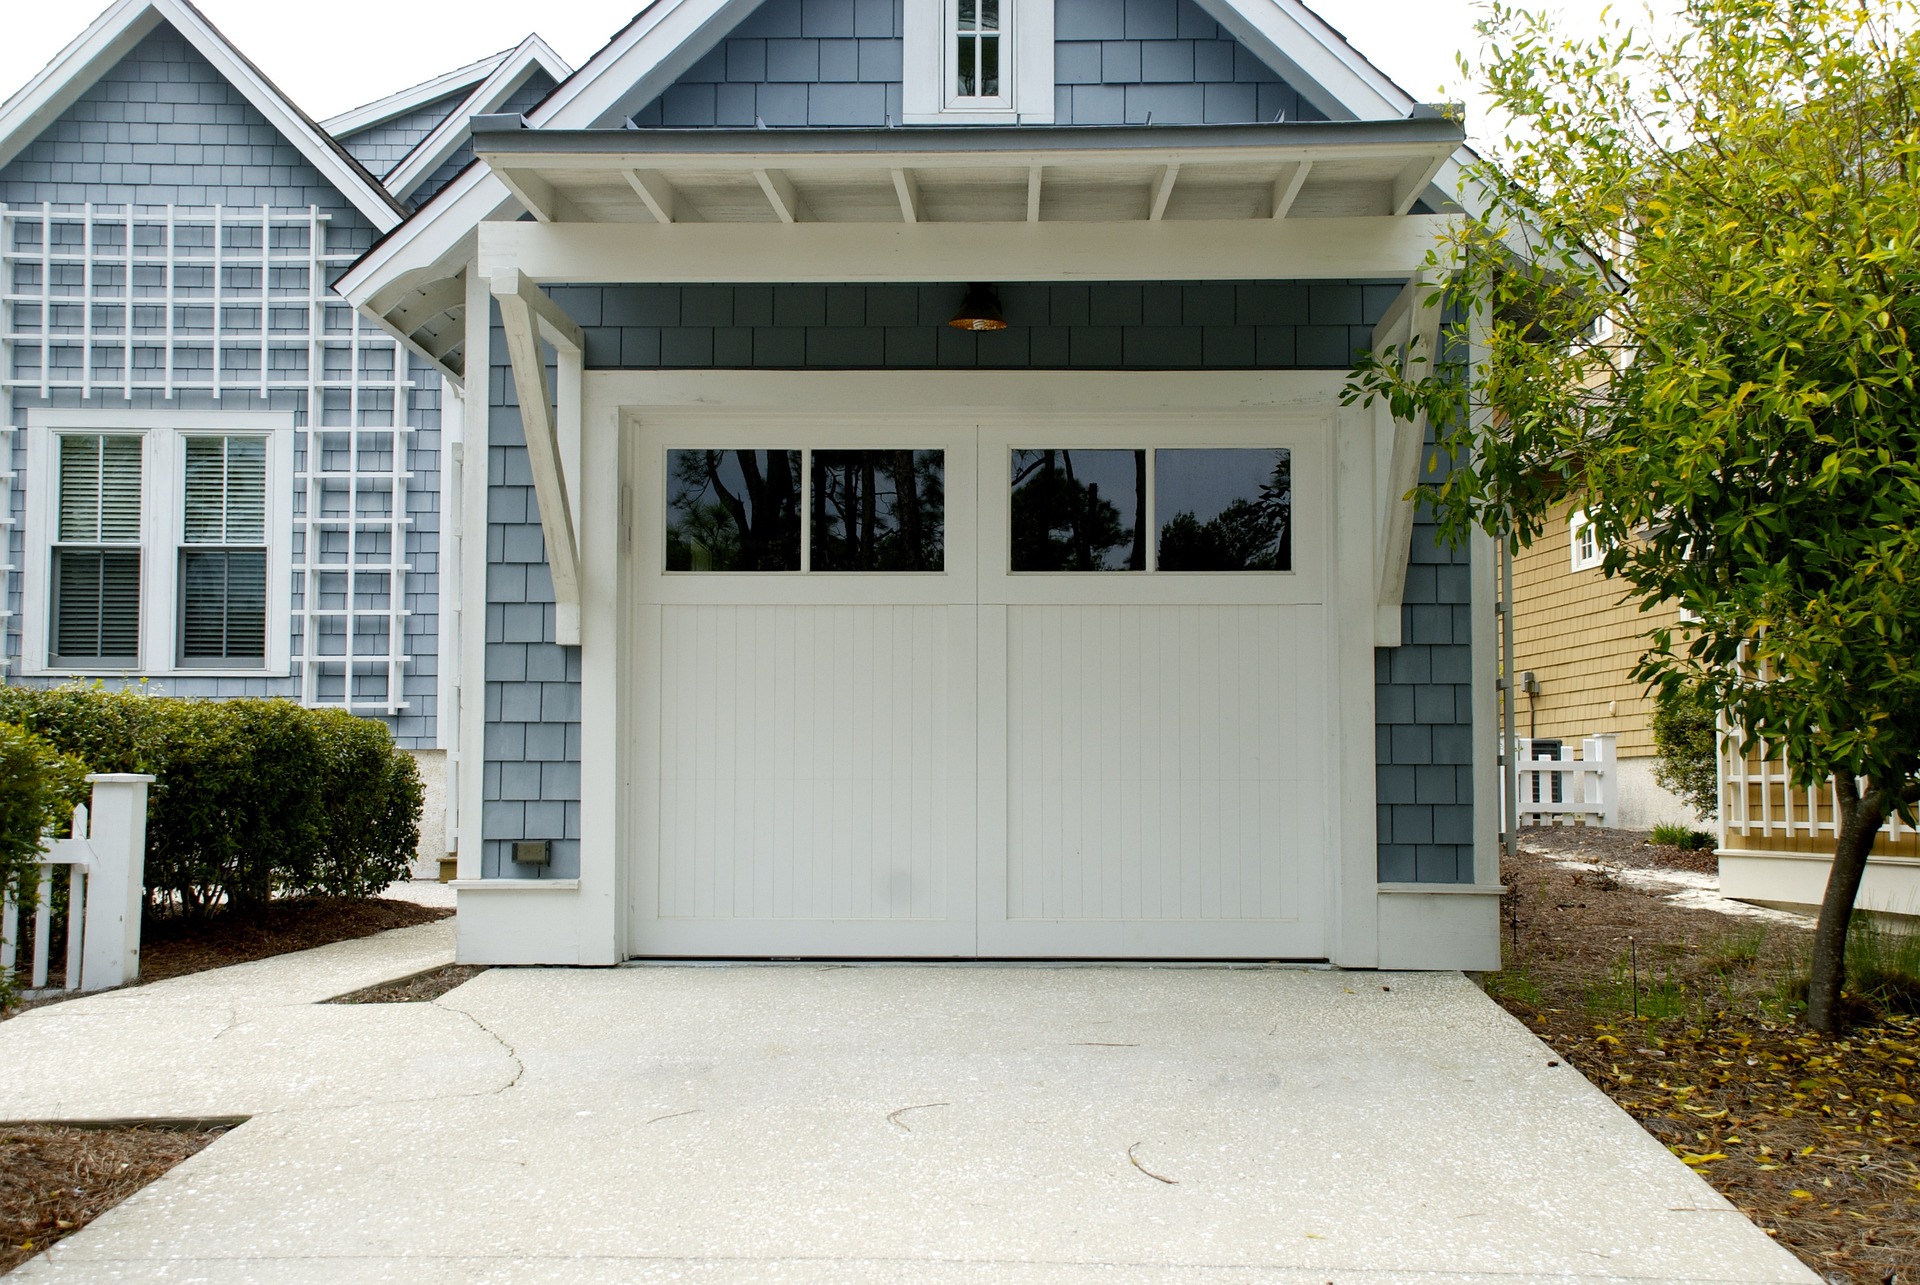 A broken spring is no time for a DIY project. Opt for a new door and opener that will offer your home a garage solution with less maintenance for years to come.